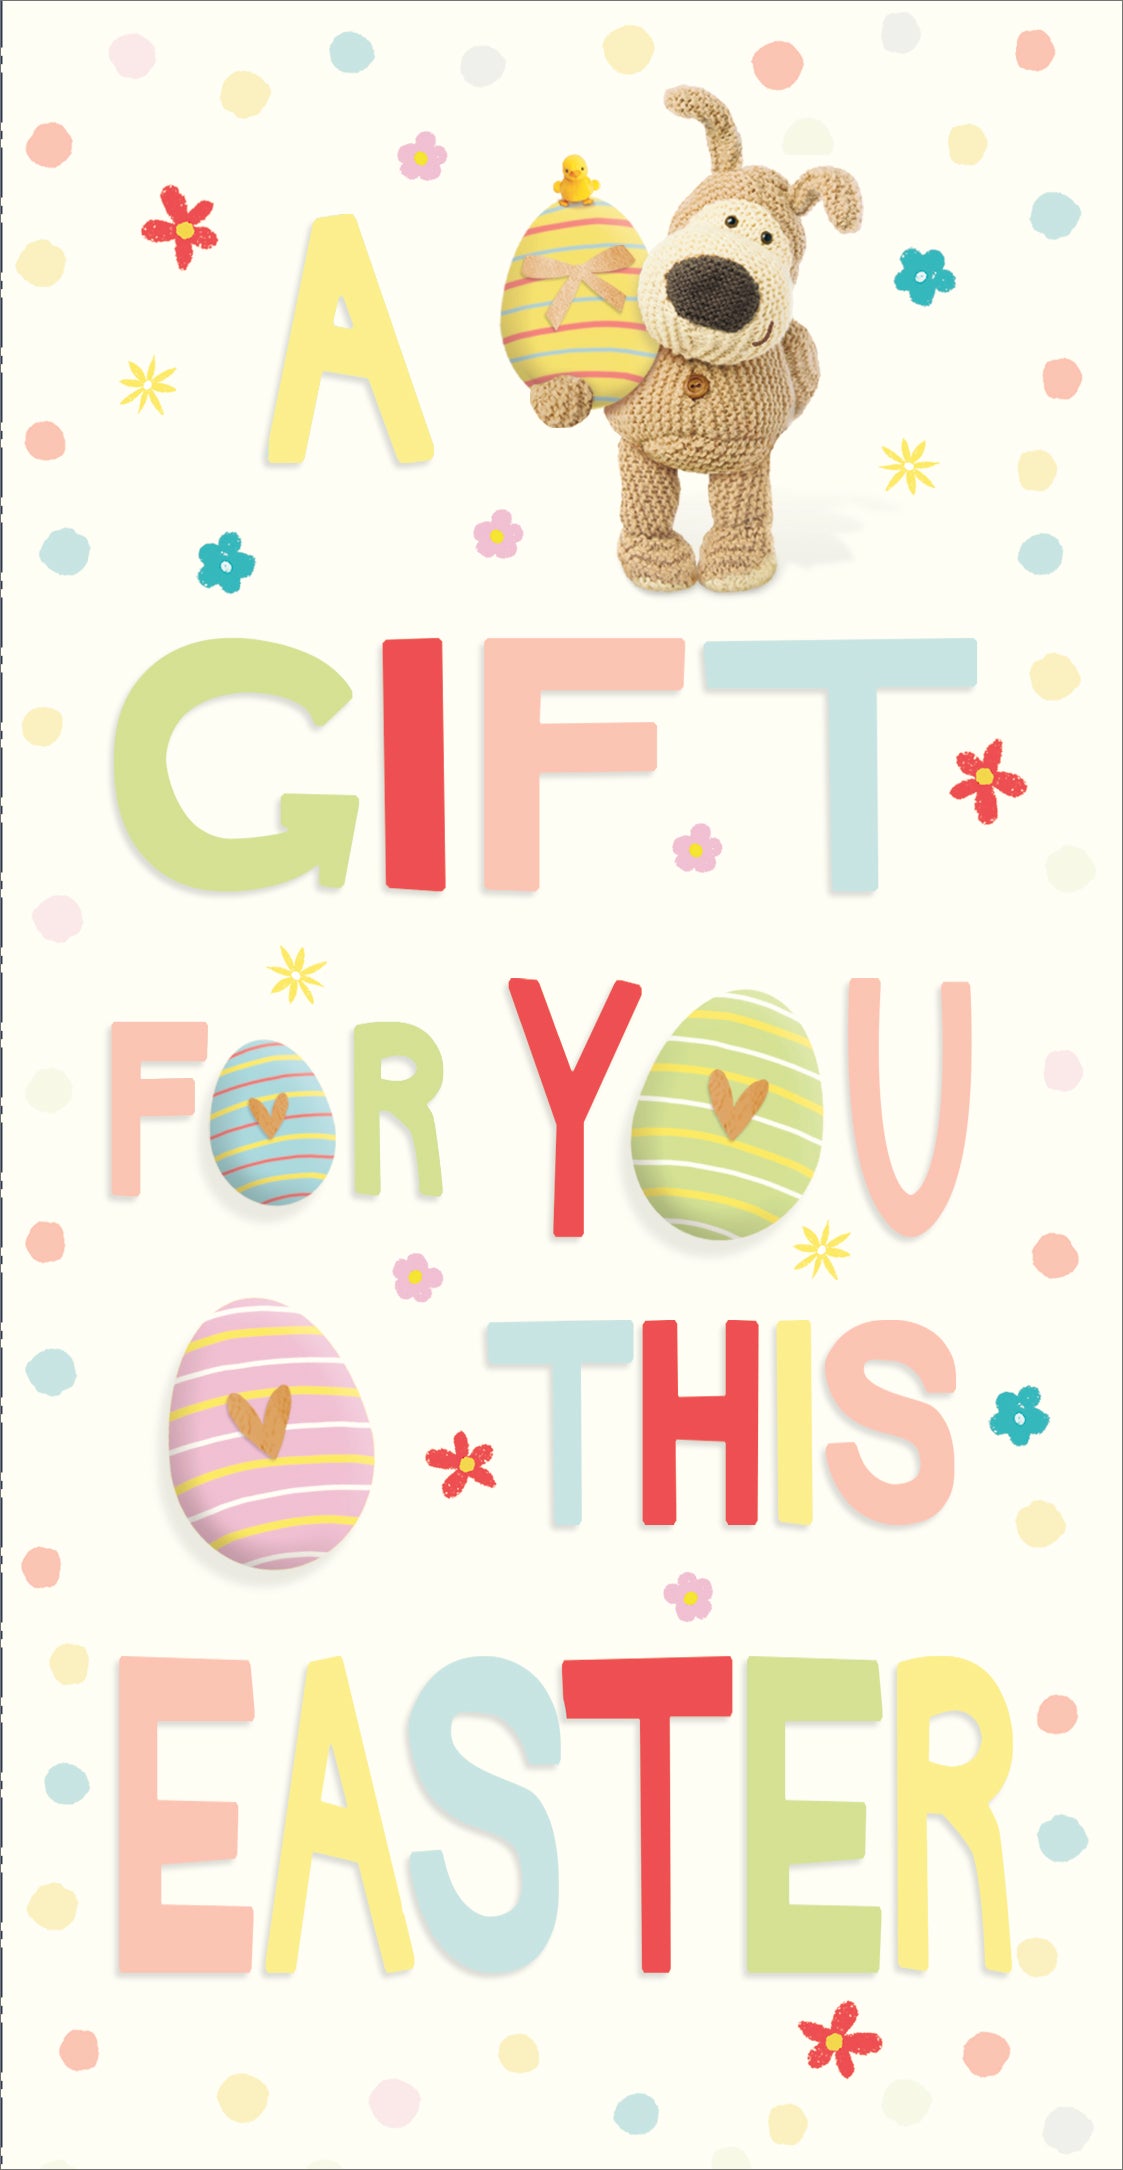 Boofle A Gift This Easter Fun Easter Gift Card Cute Money Wallet Card